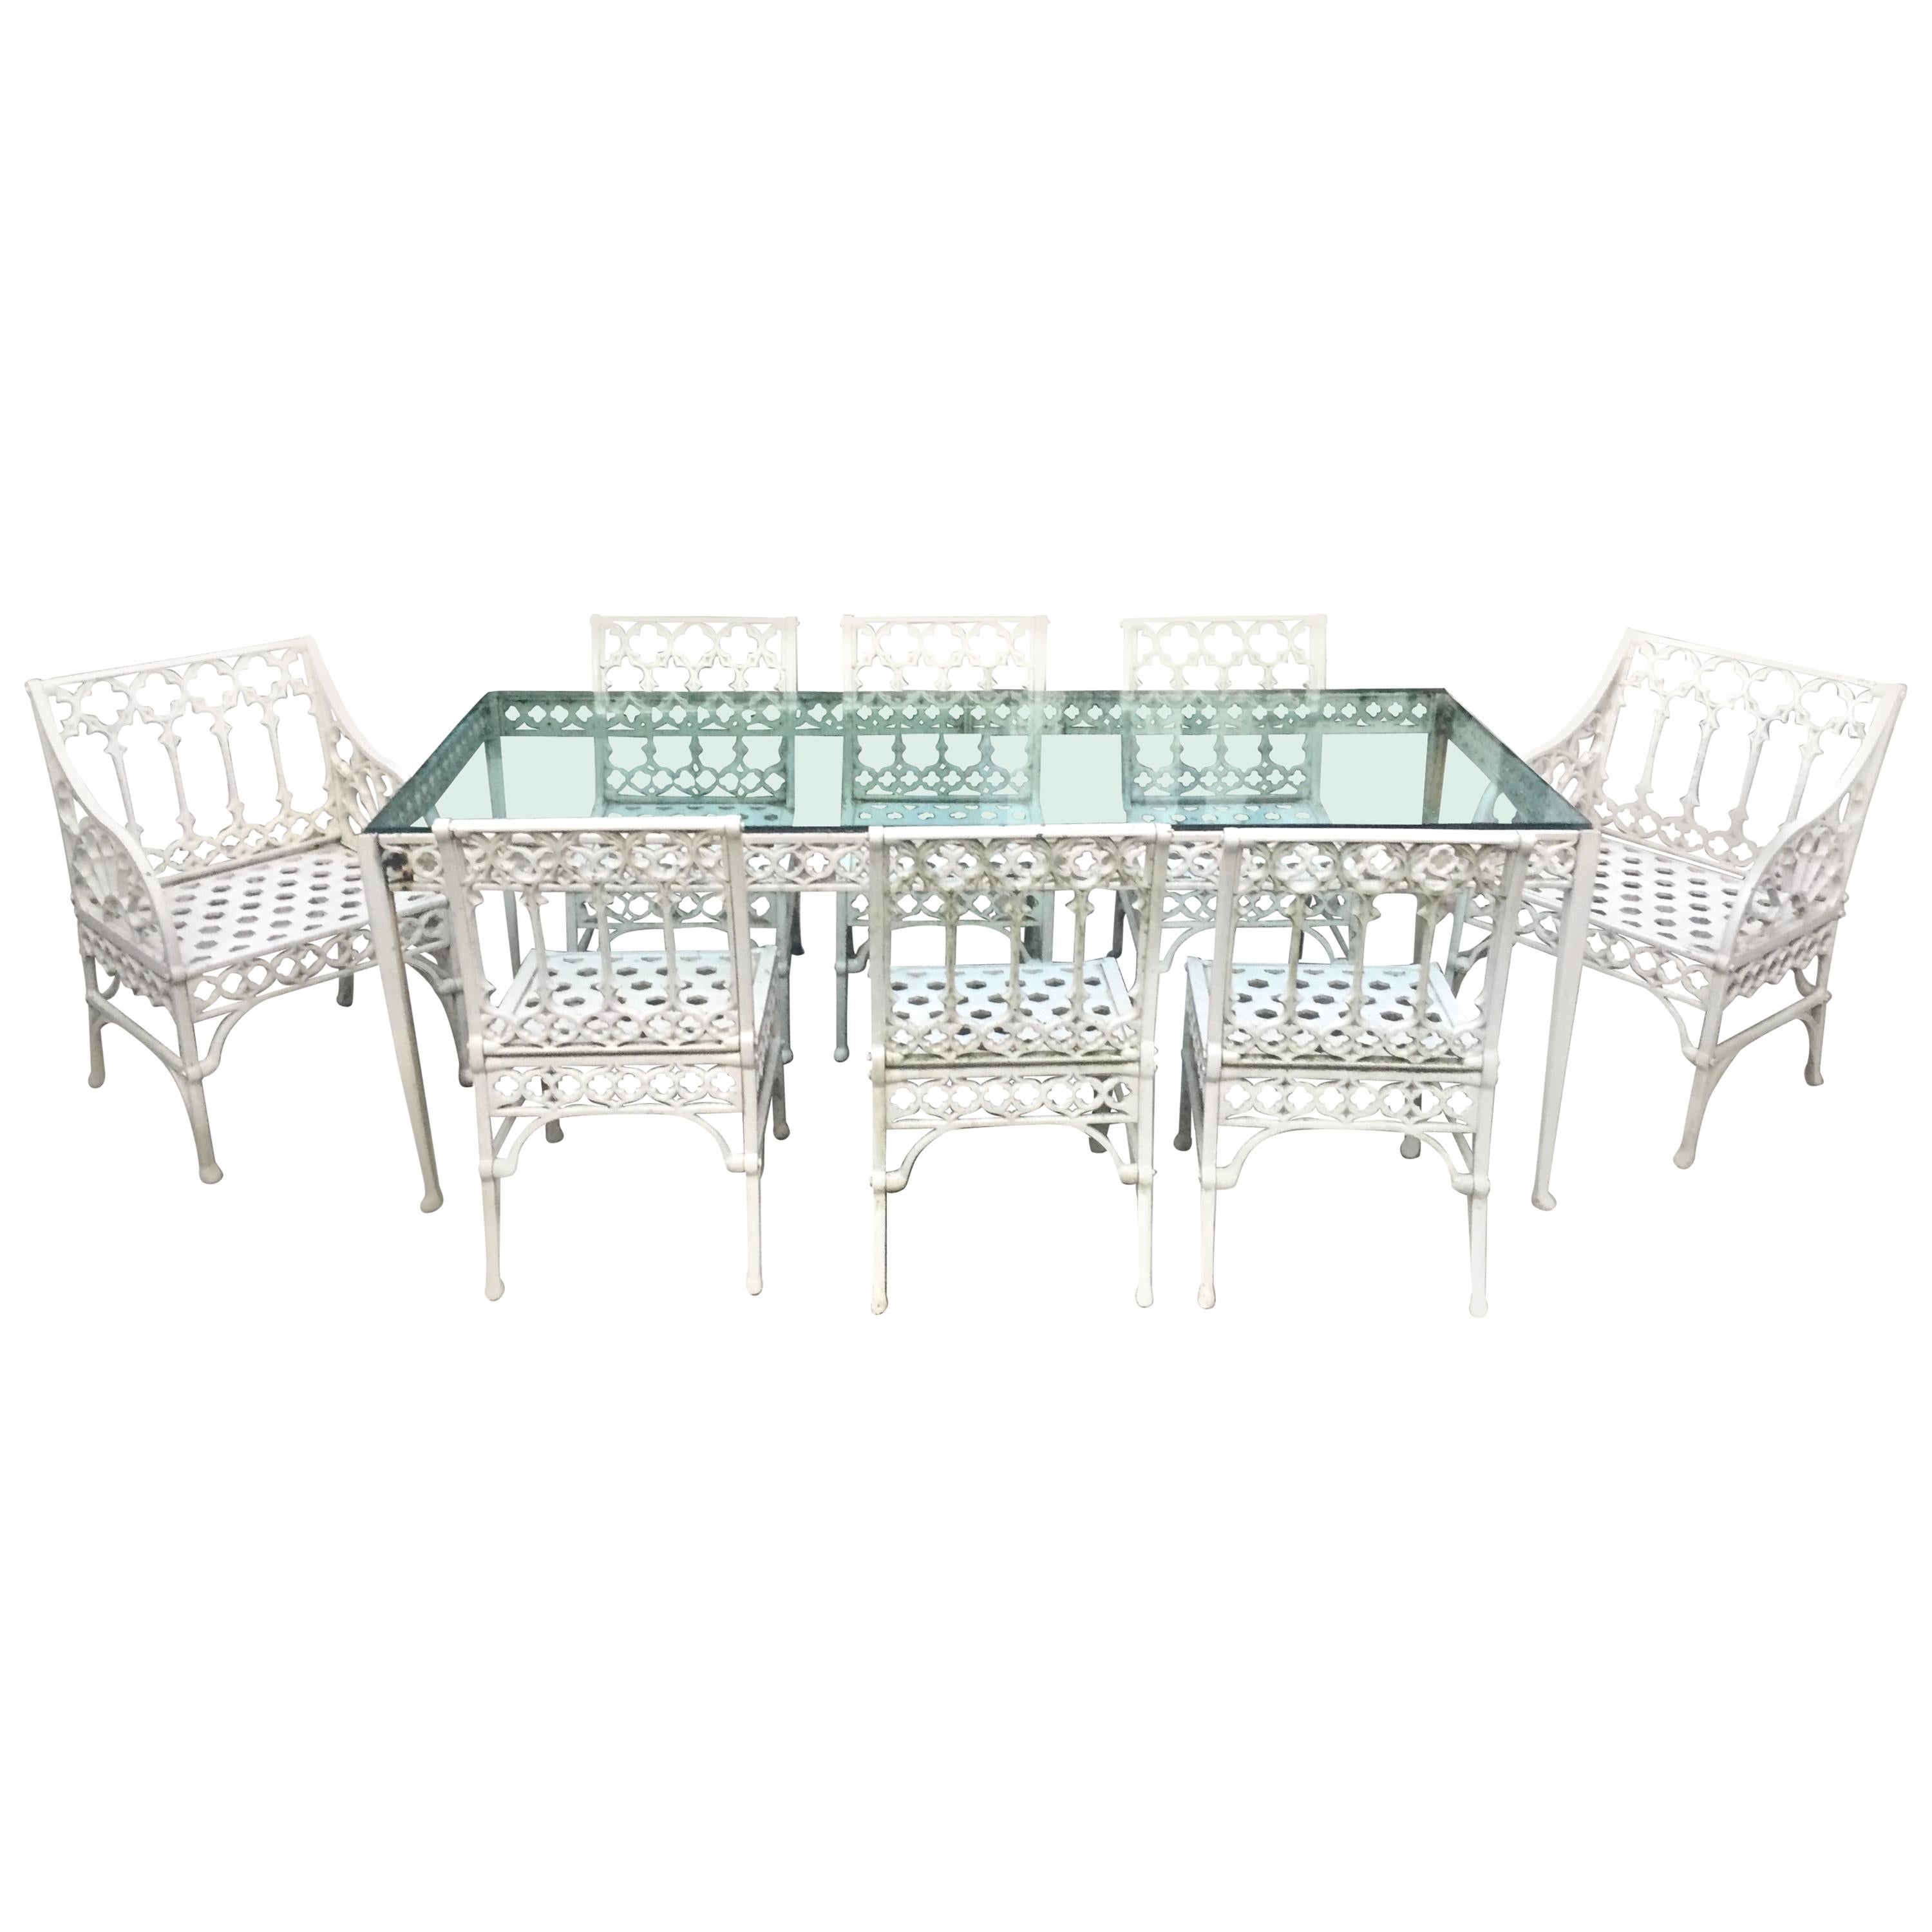 Gothic Revival Garden Dining Set of 8 Chairs and Table